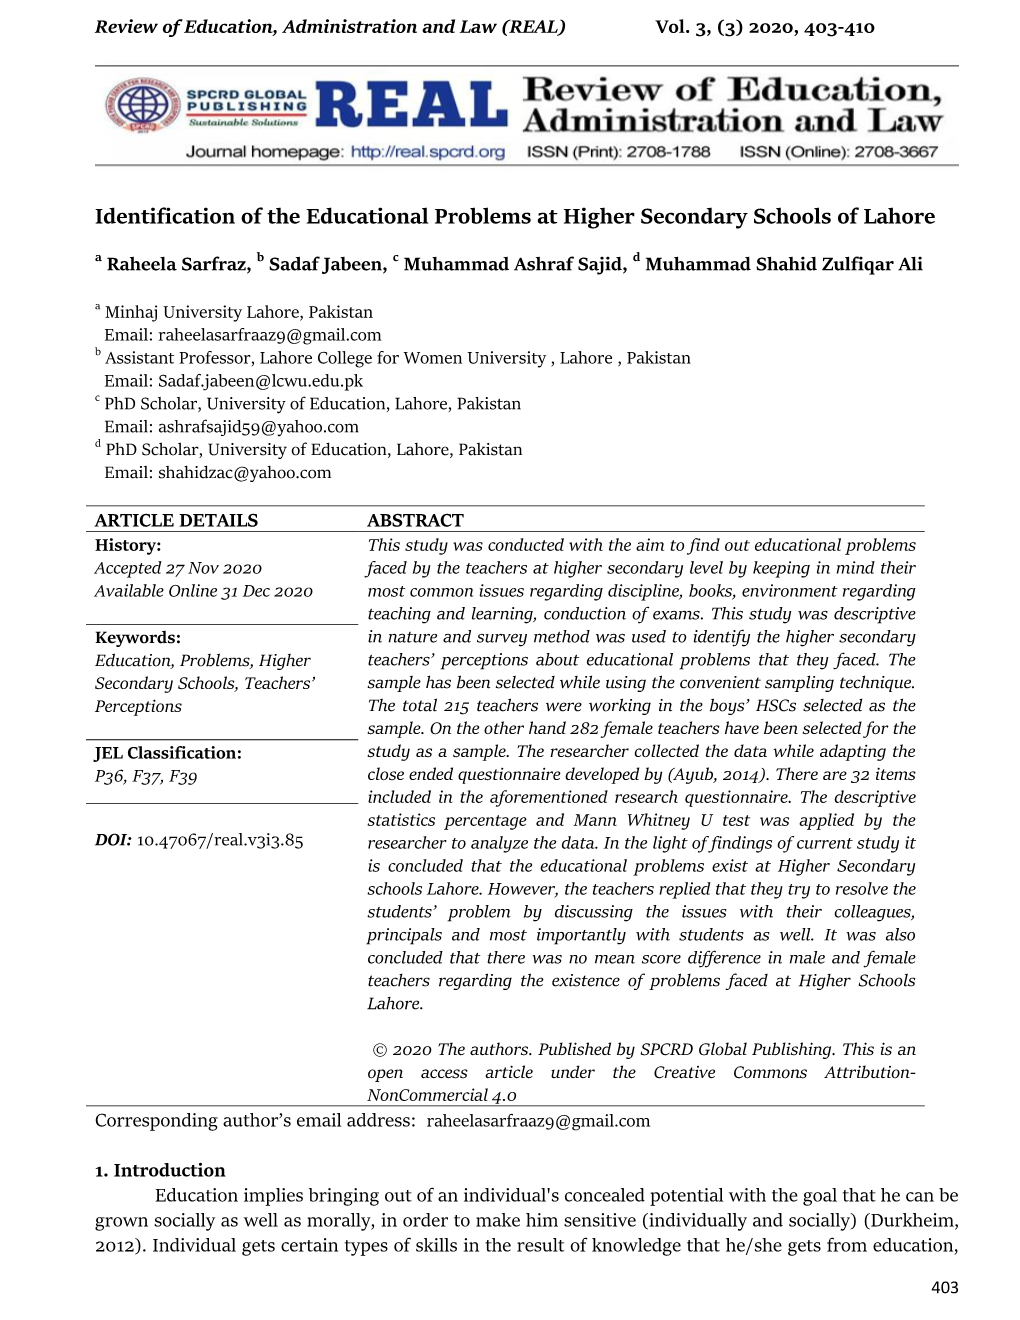 Identification of the Educational Problems at Higher Secondary